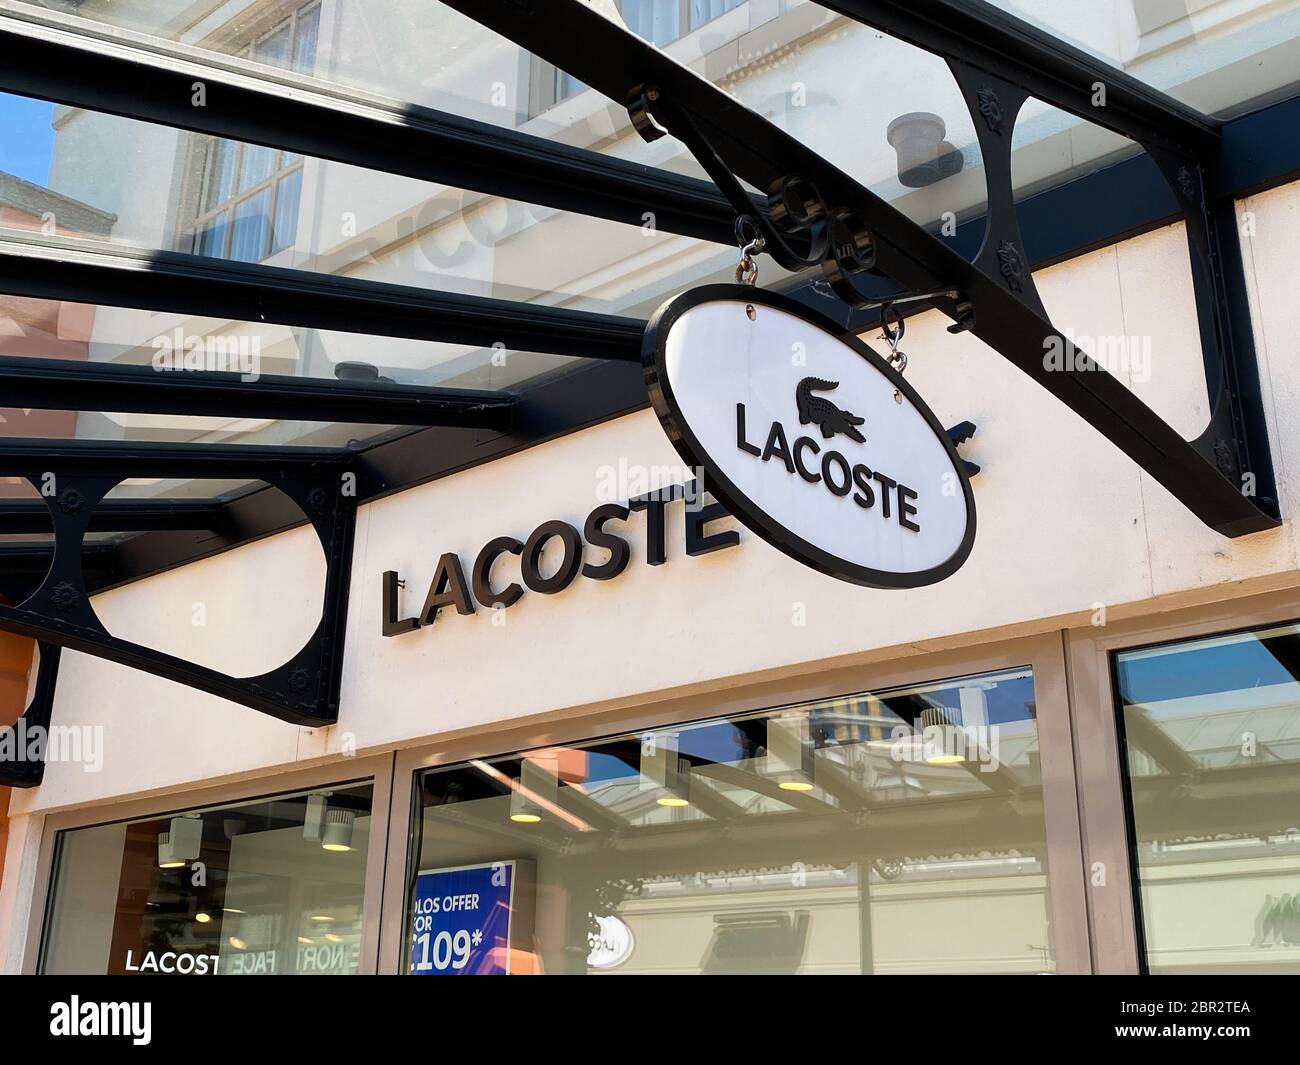 Roermond, Netherlands - May 19. 2020: View on logo lettering of French Lacoste company at shop entrance Stock Photo